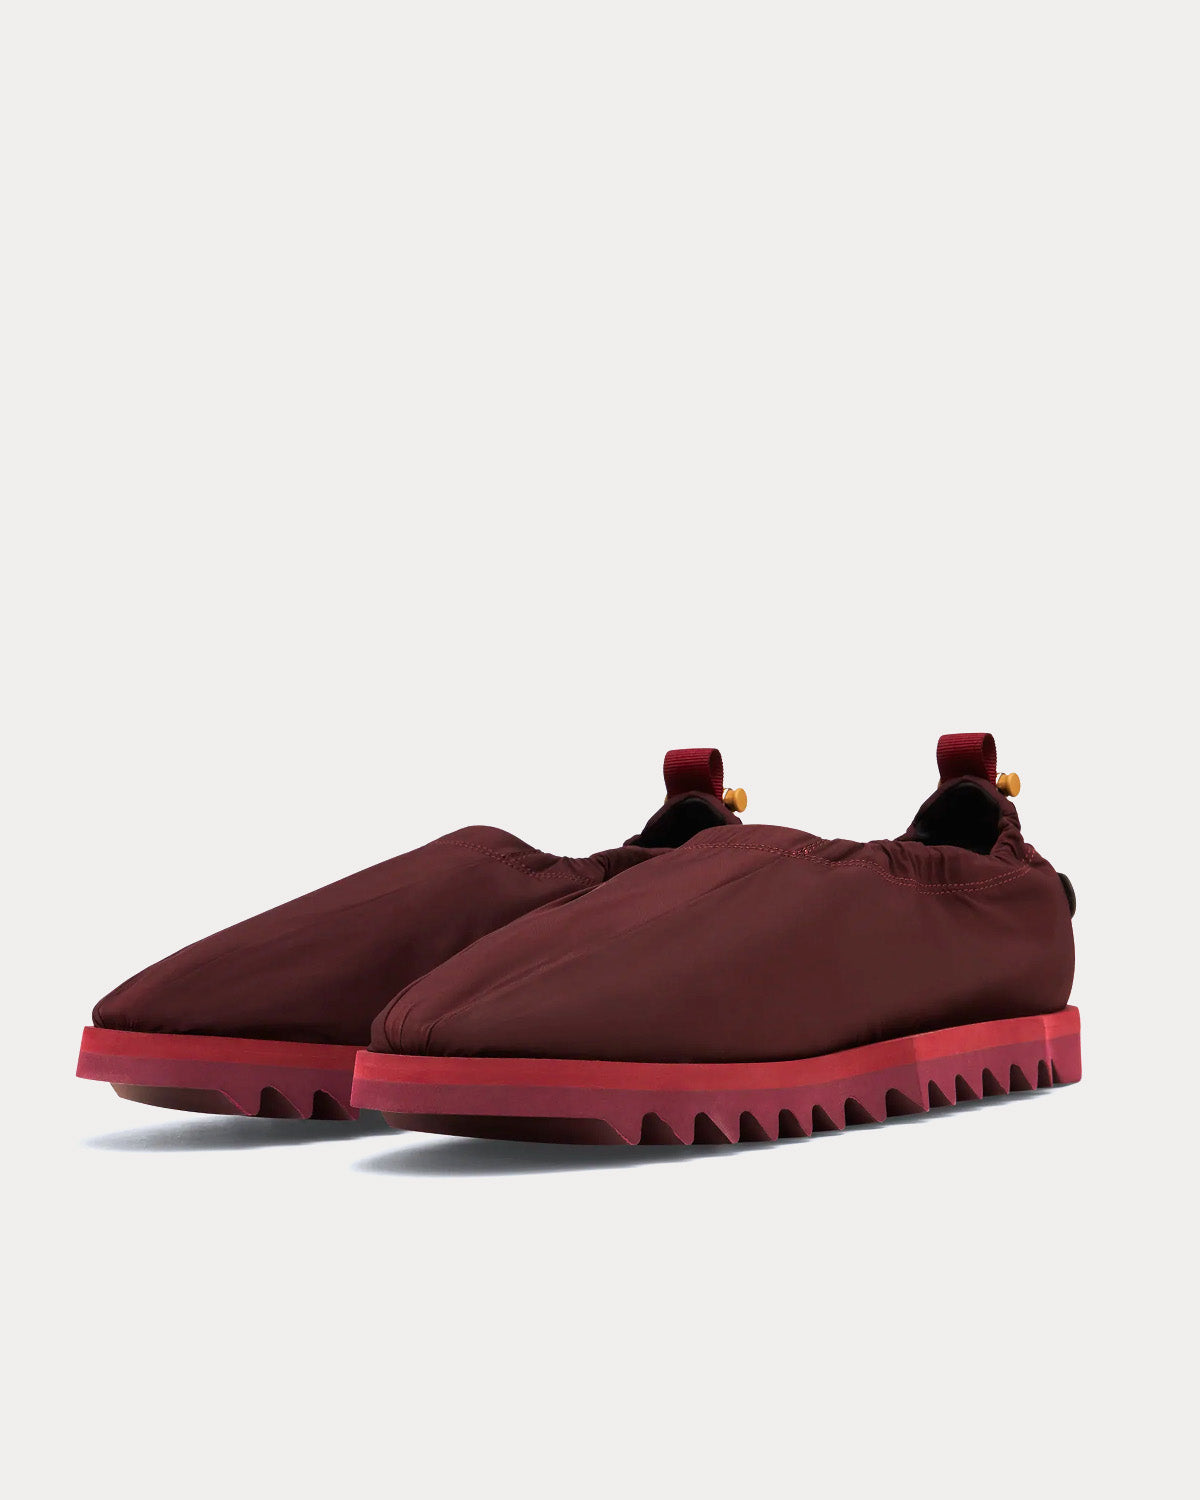 A-COLD-WALL* - Nylon Loafers Red Slip Ons